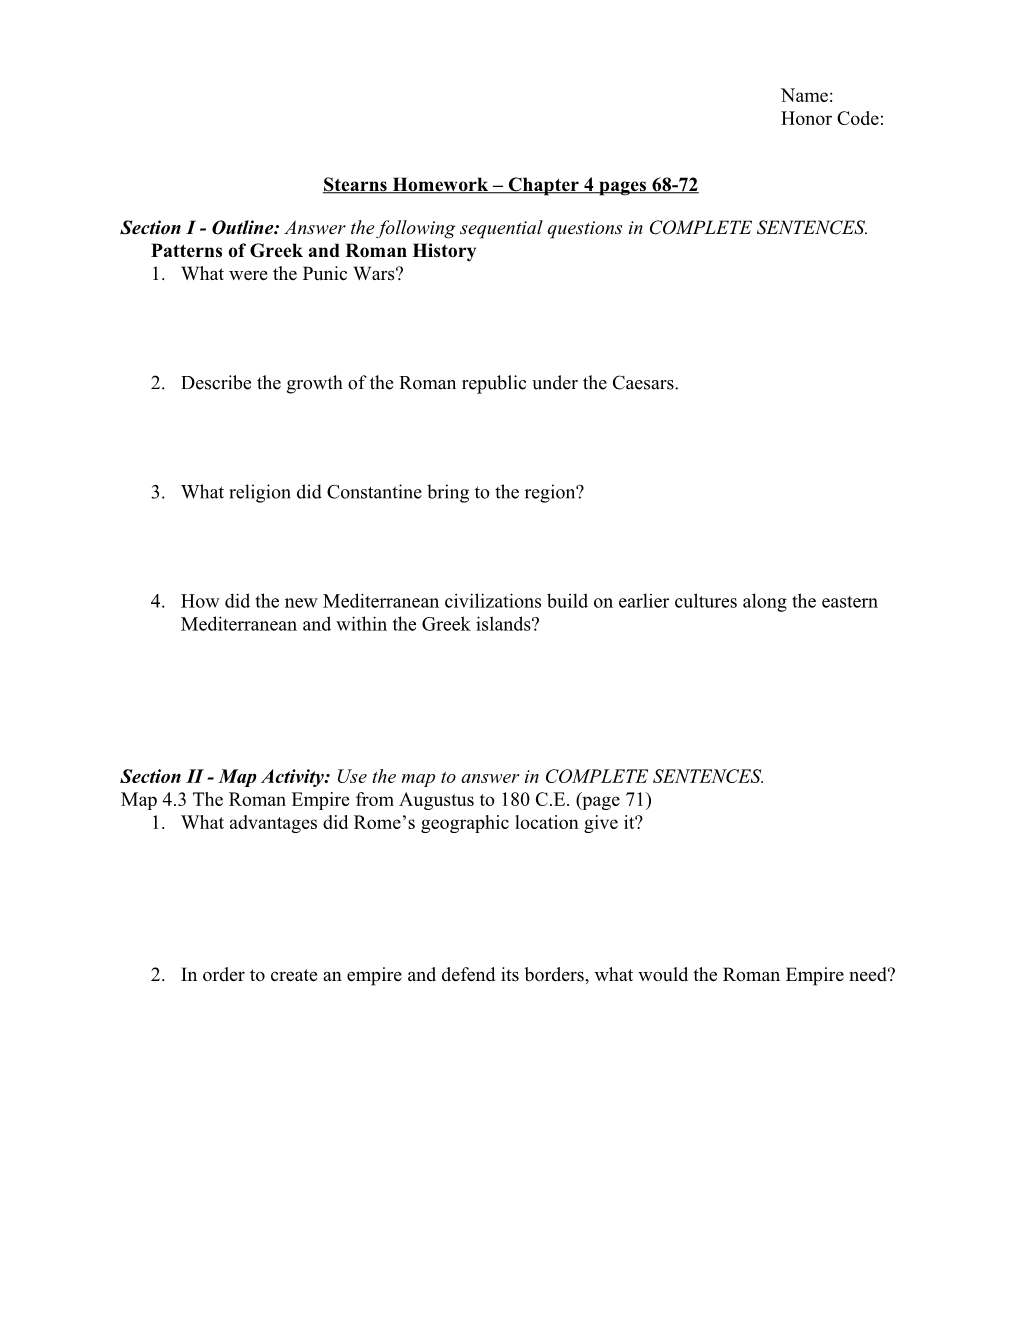 Stearns Homework Chapter 4 Pages 68-72